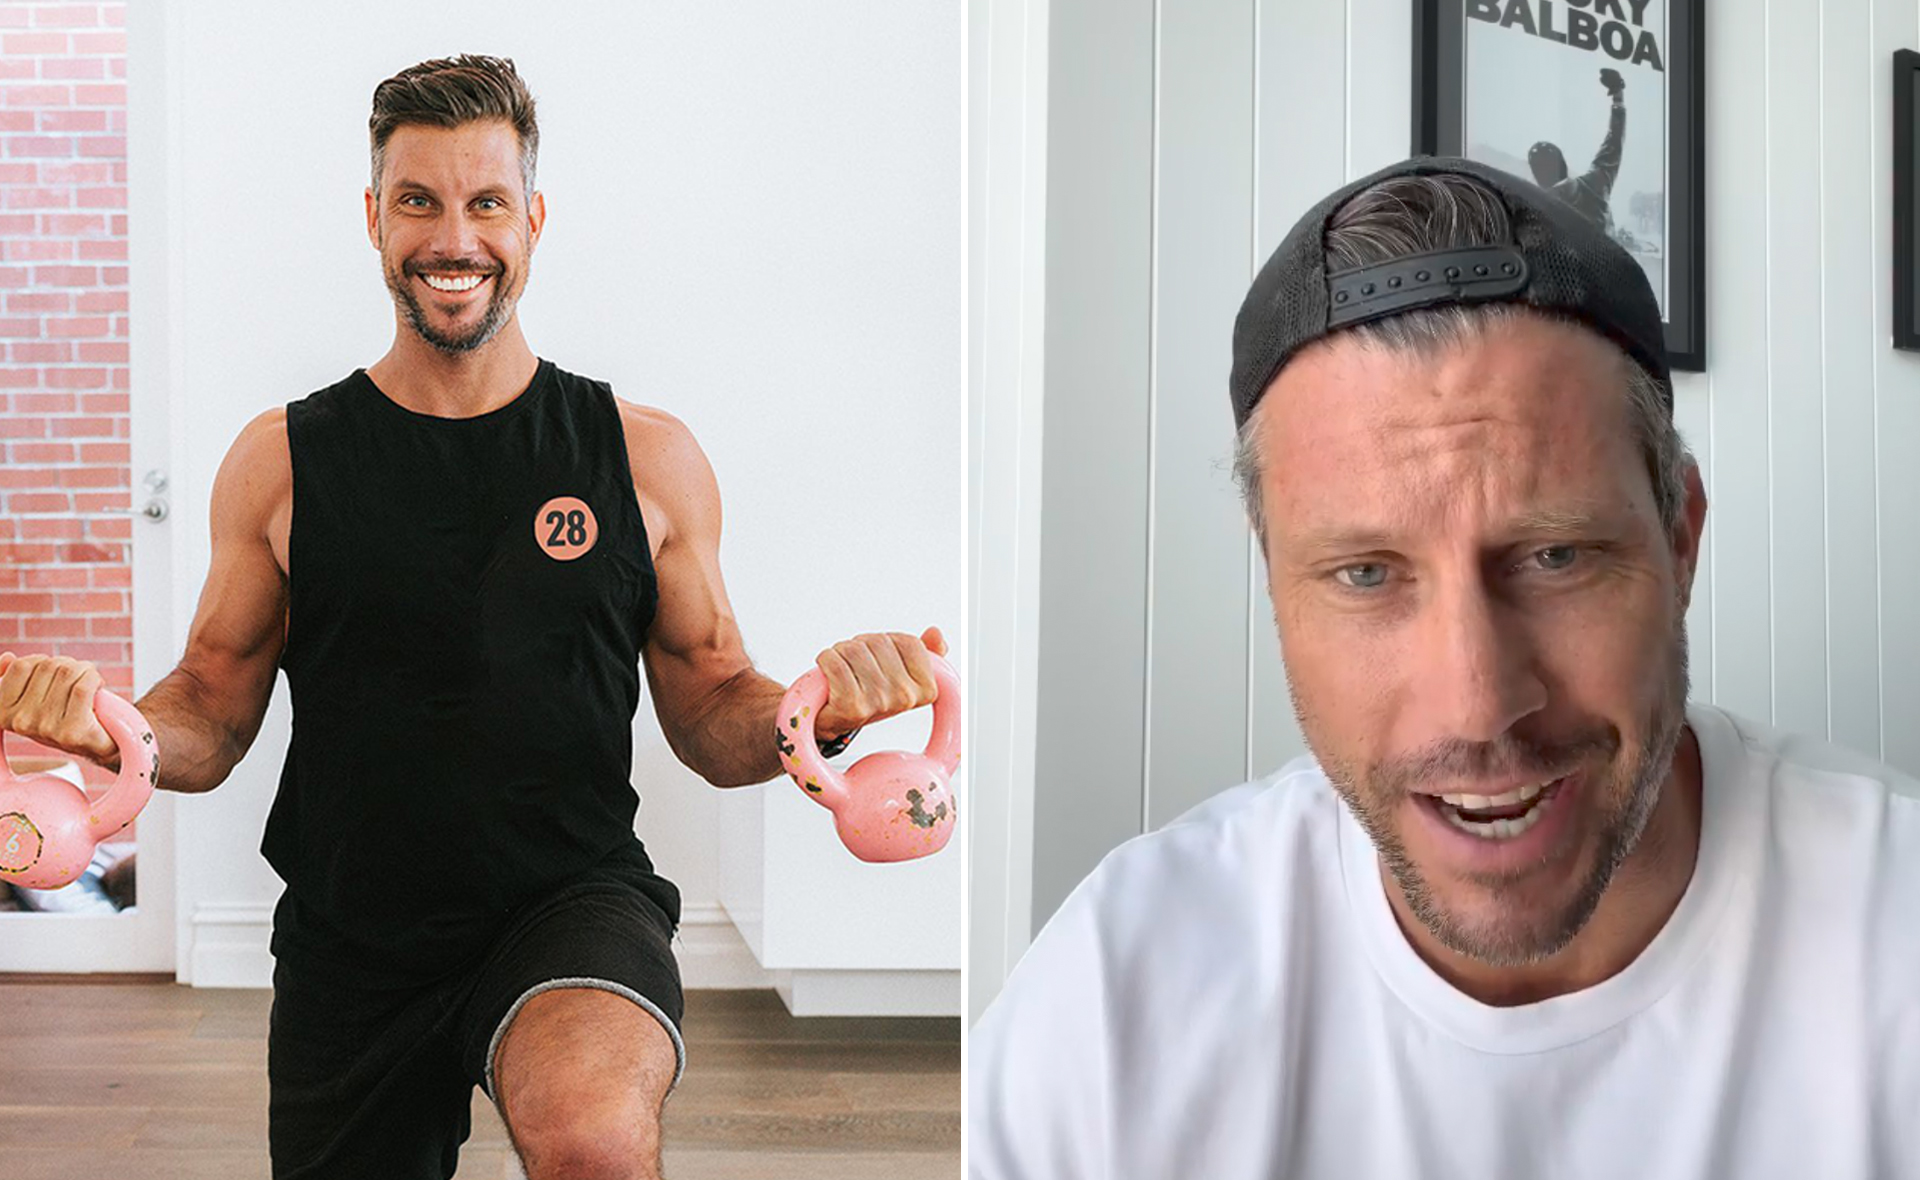 Bachelor favourite Sam Wood hits back at trolls who claimed he “faked” his body transformation to advertise his fitness program